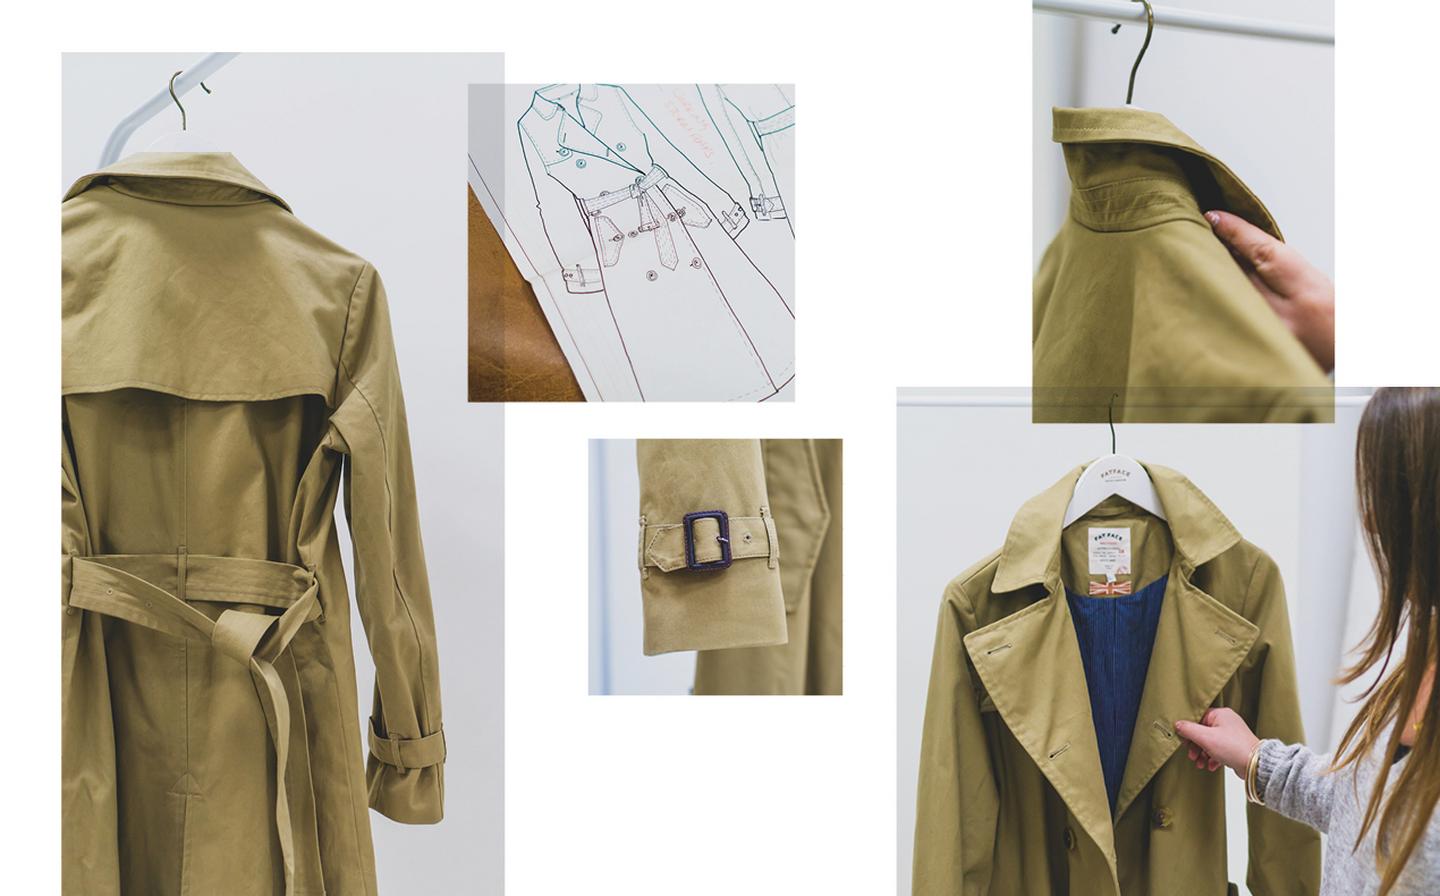 Fashion design sketches and trench coat details